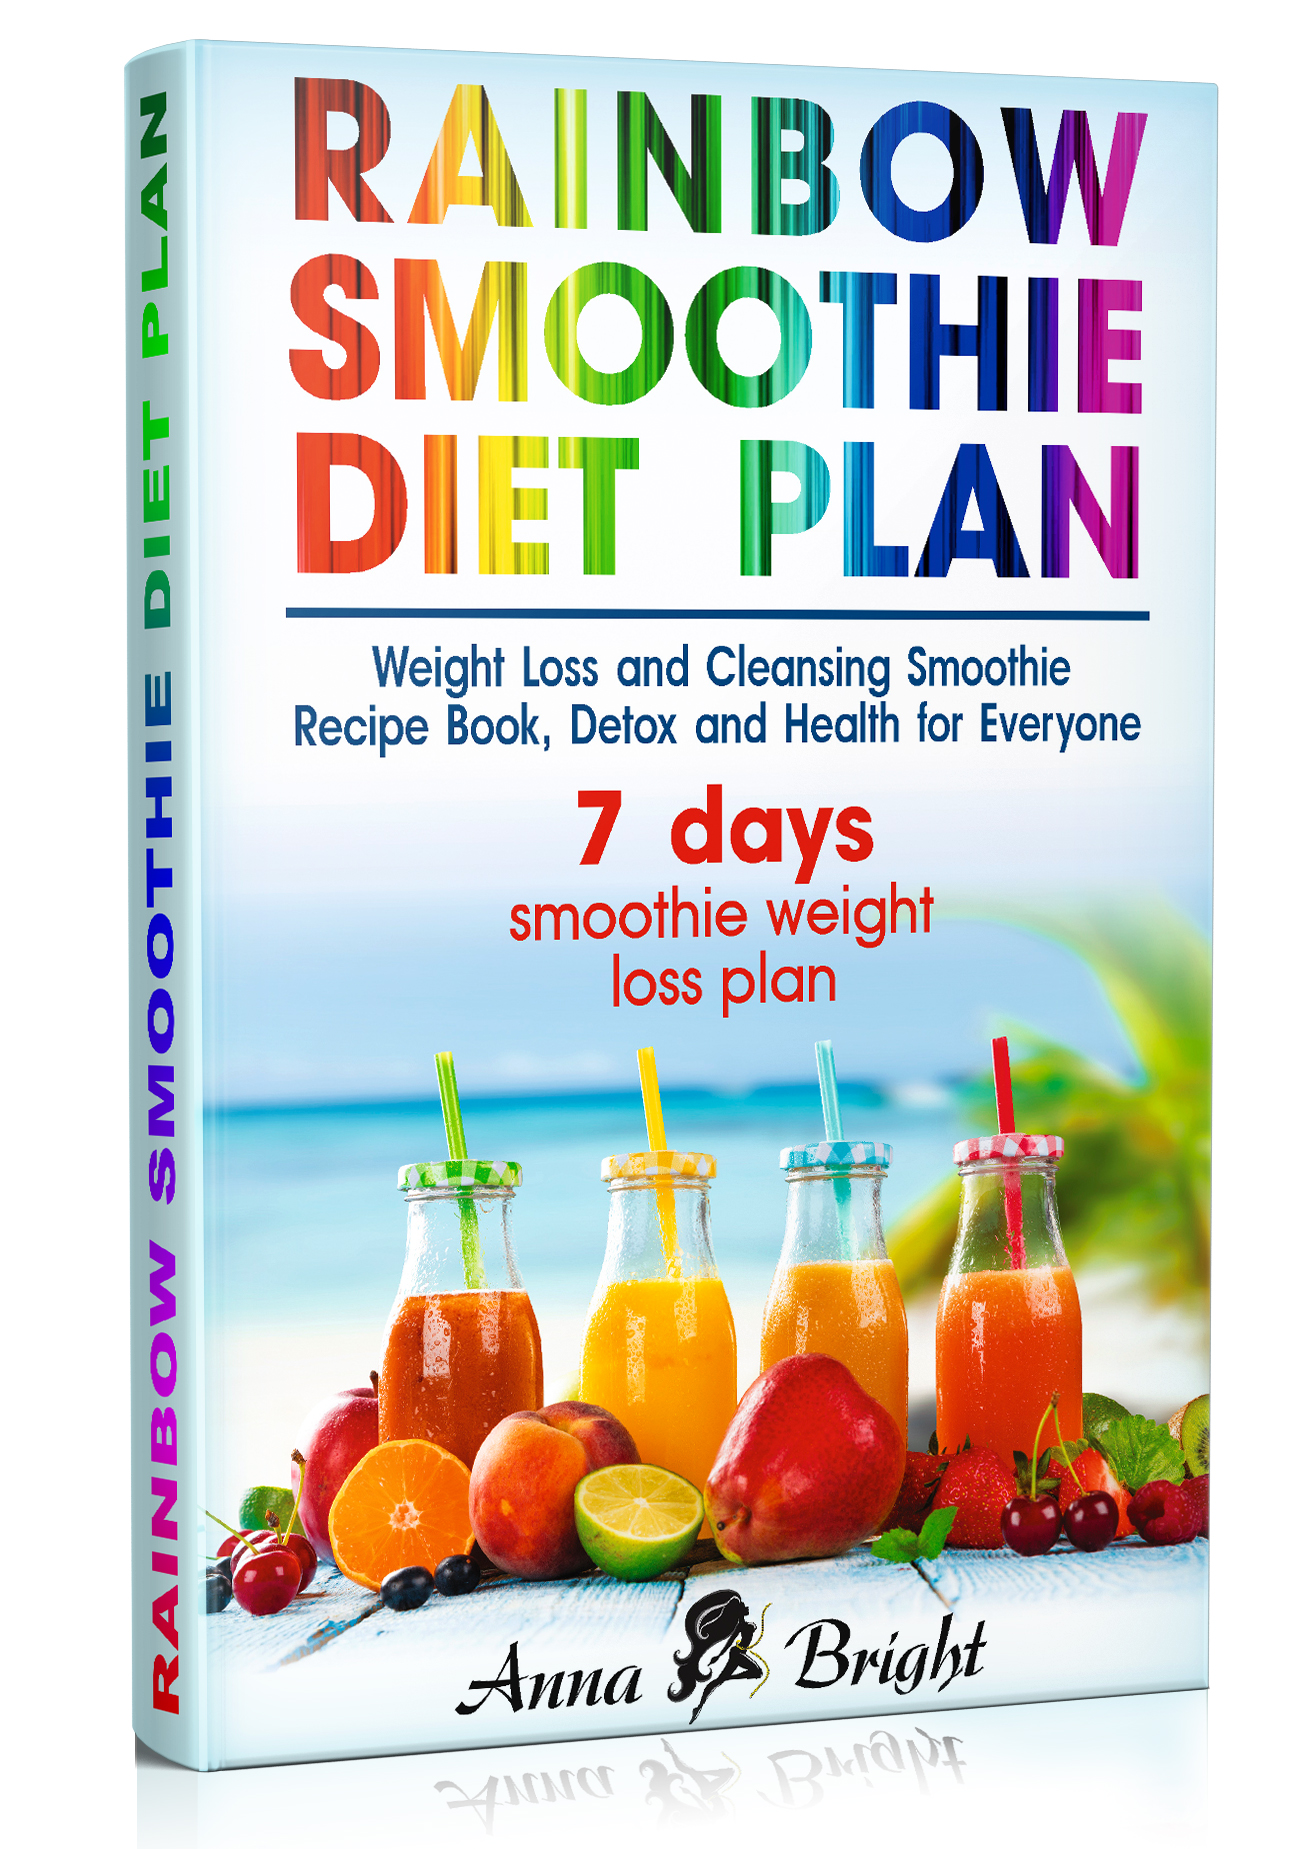 FREE: Rainbow Smoothie Diet Plan: Weight Loss and Cleansing Smoothie Recipe Book, Detox and Health for Everyone (+ 3 and 7 days smoothie weight loss plan) by Anna Bright